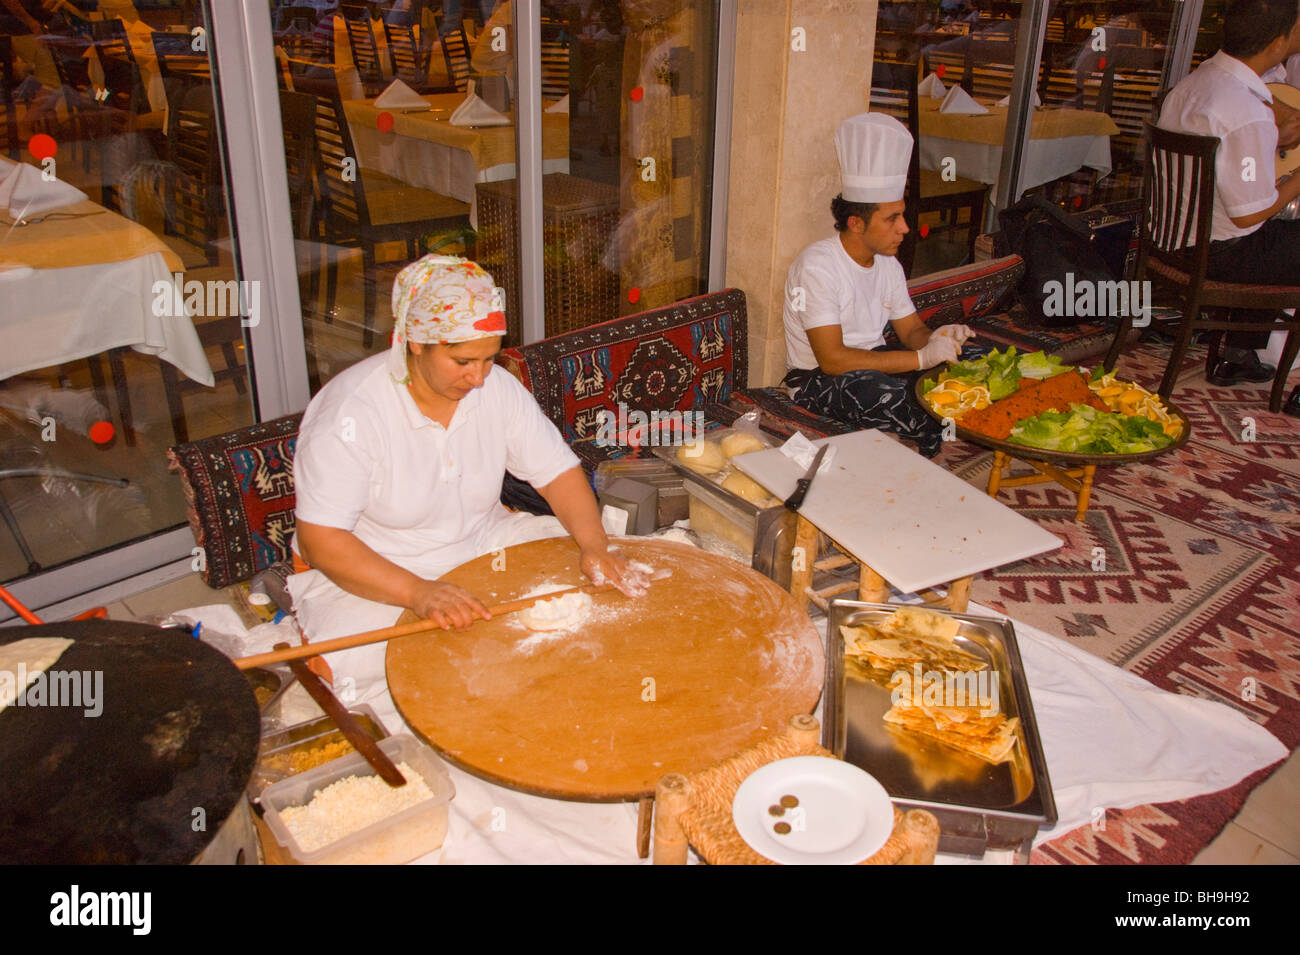 Turkish lady demonsrates local pastry making techniques on large bread board Stock Photo